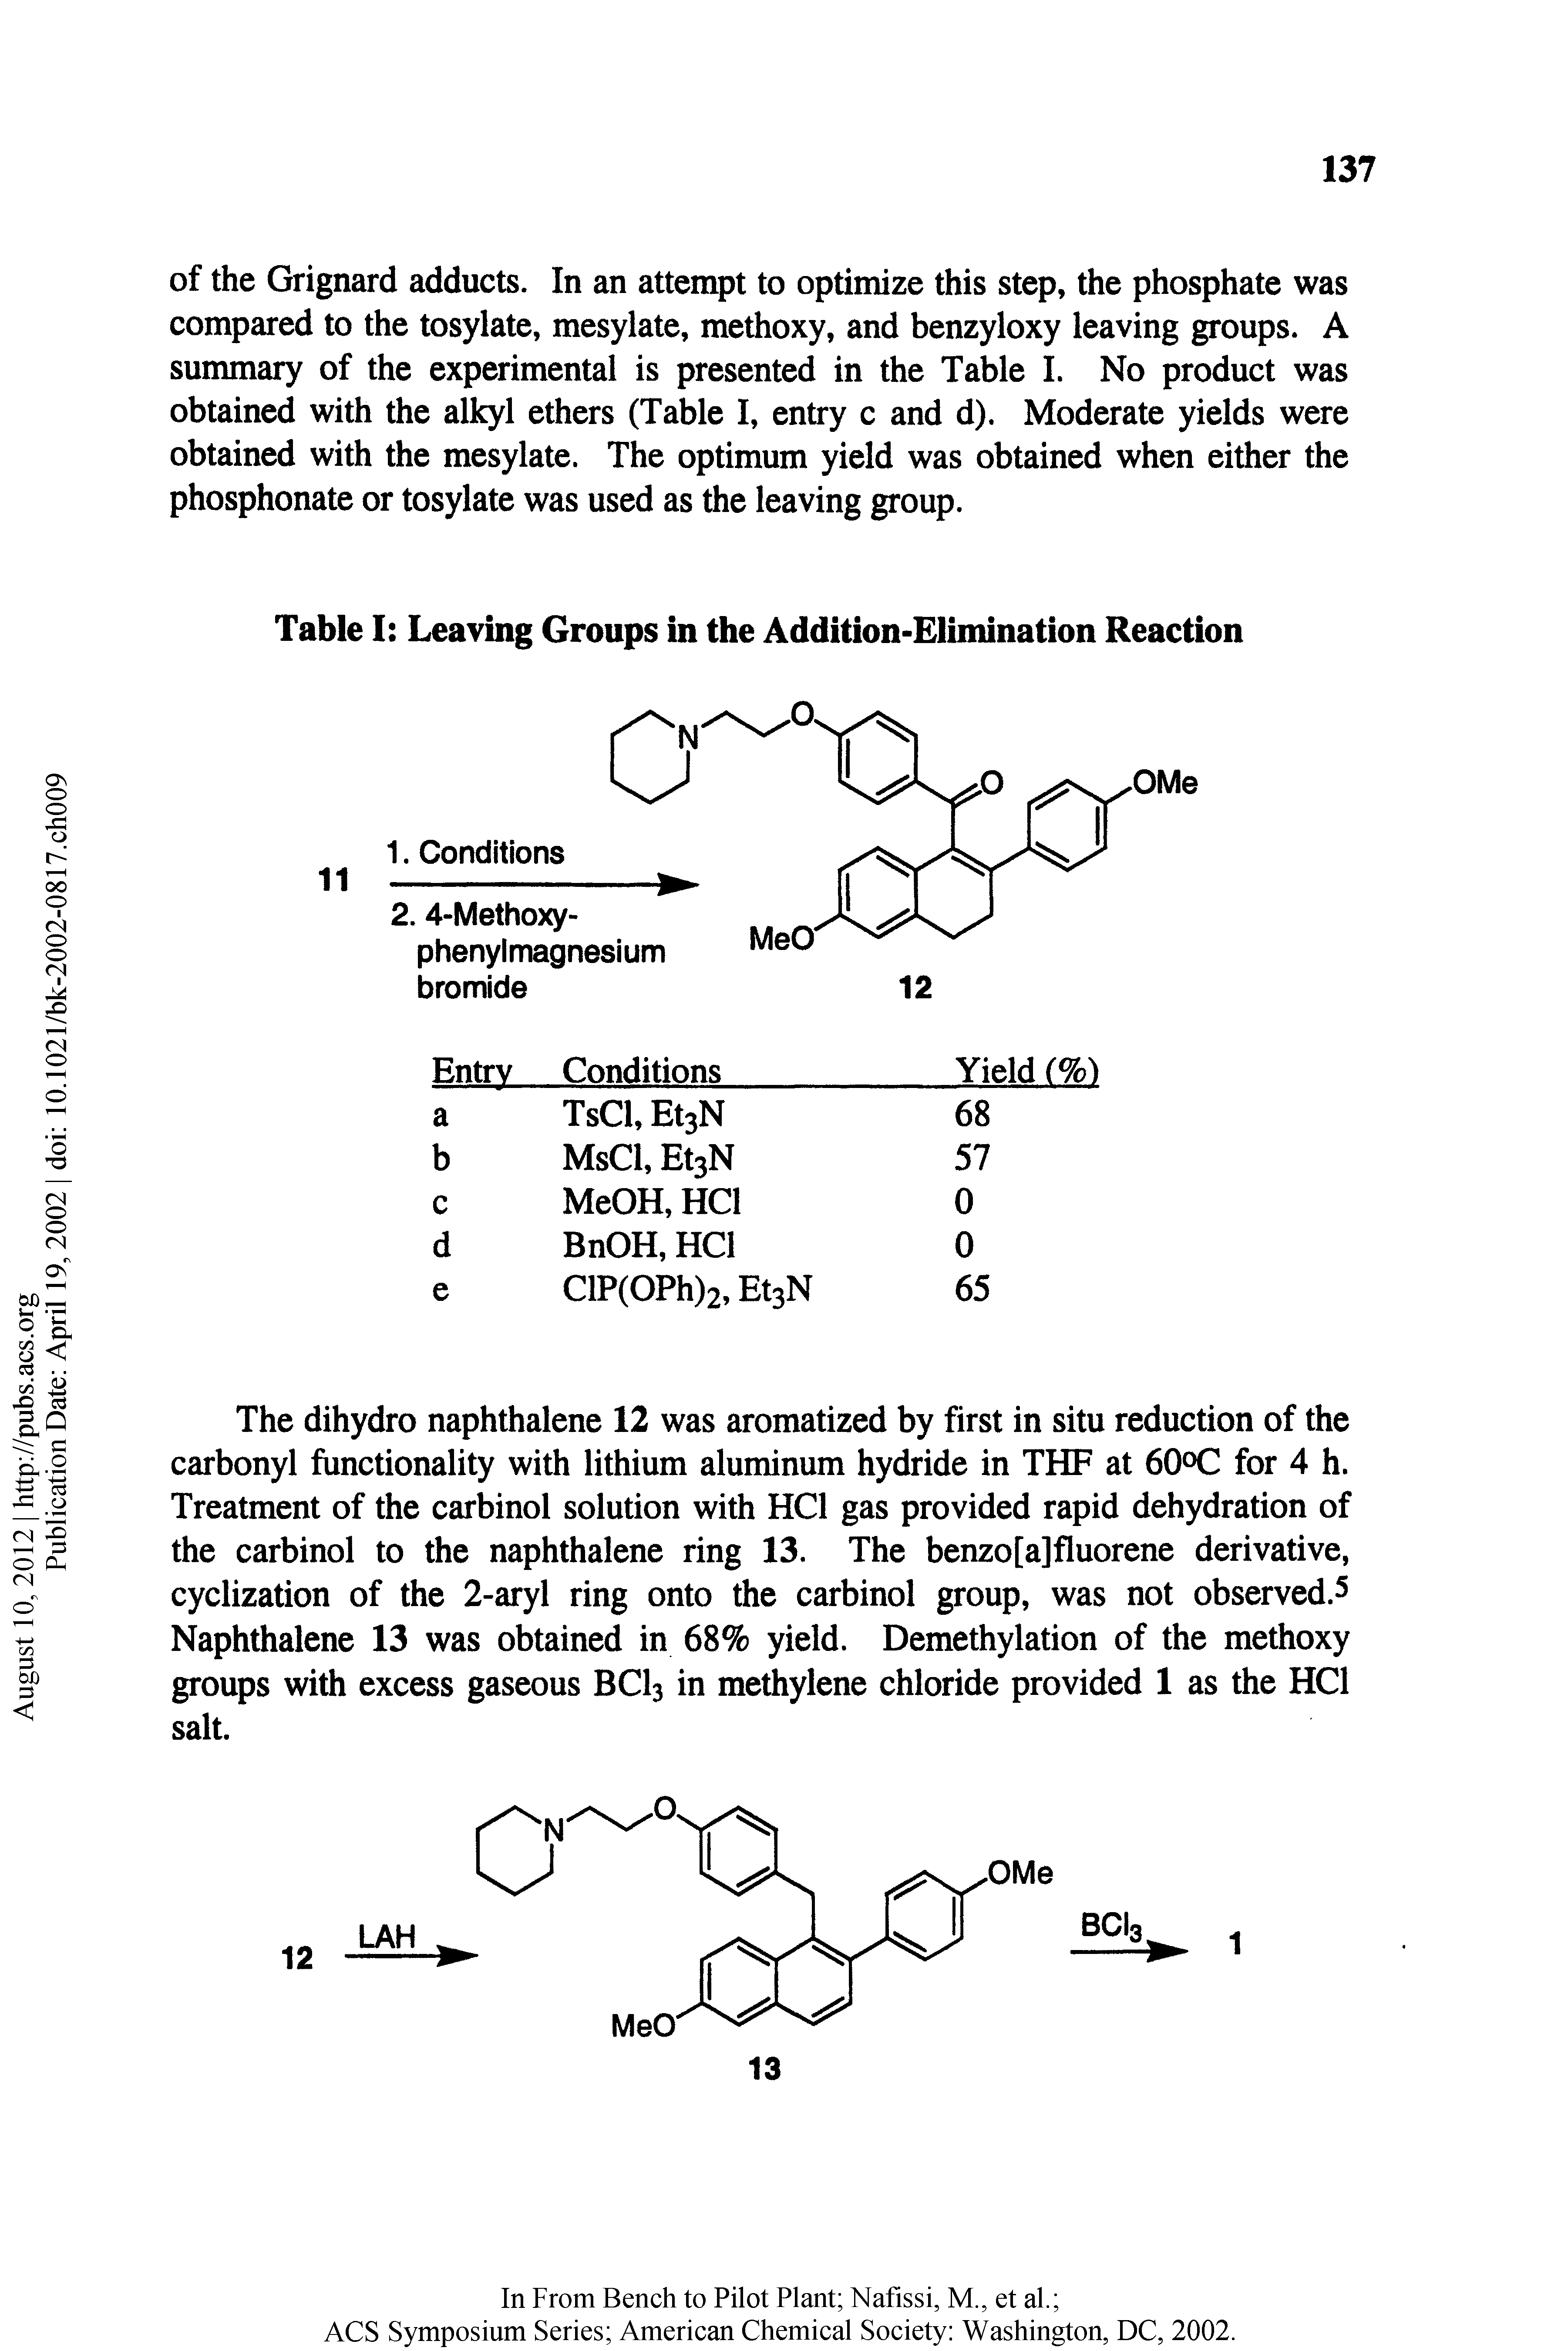 Table I Leaving Groups in the Addition-Elimination Reaction...